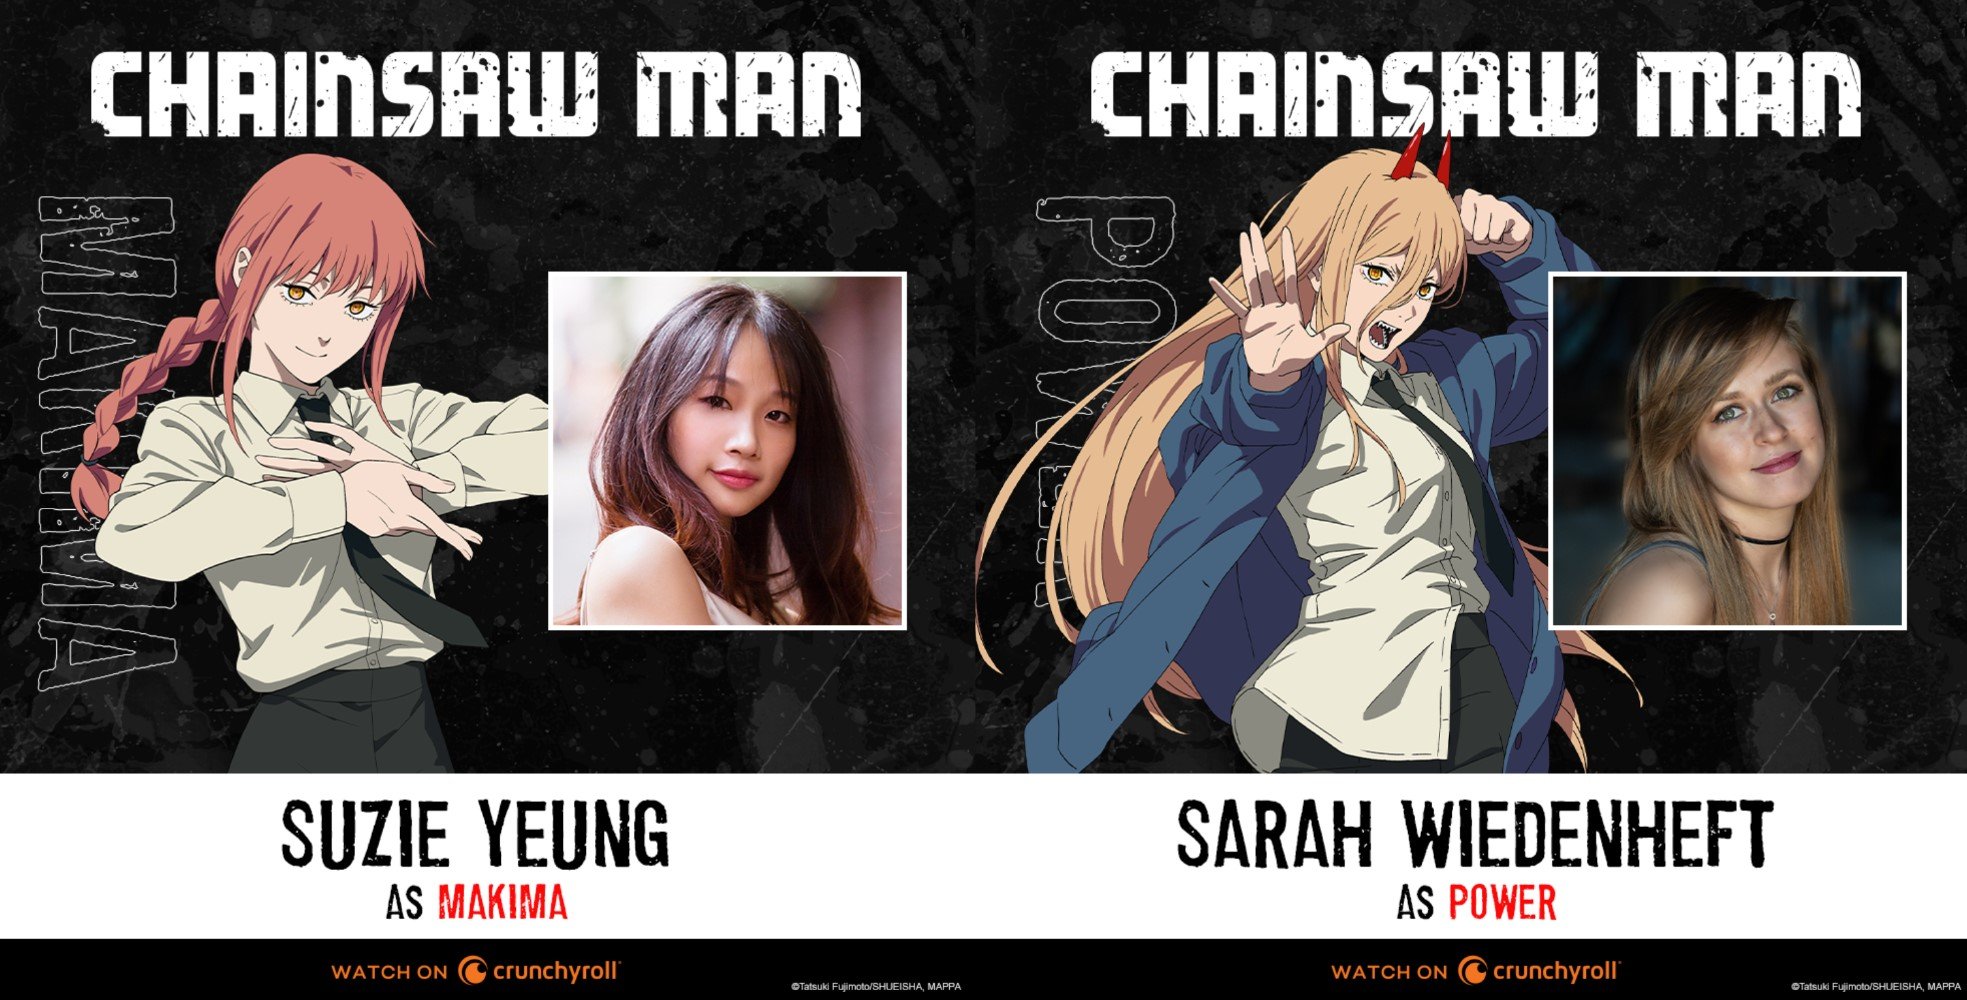 'Chainsaw Man' images featuring dub cast  members Suzie Yeung and Sarah Wiedenheft and their characters, Makima and Power.